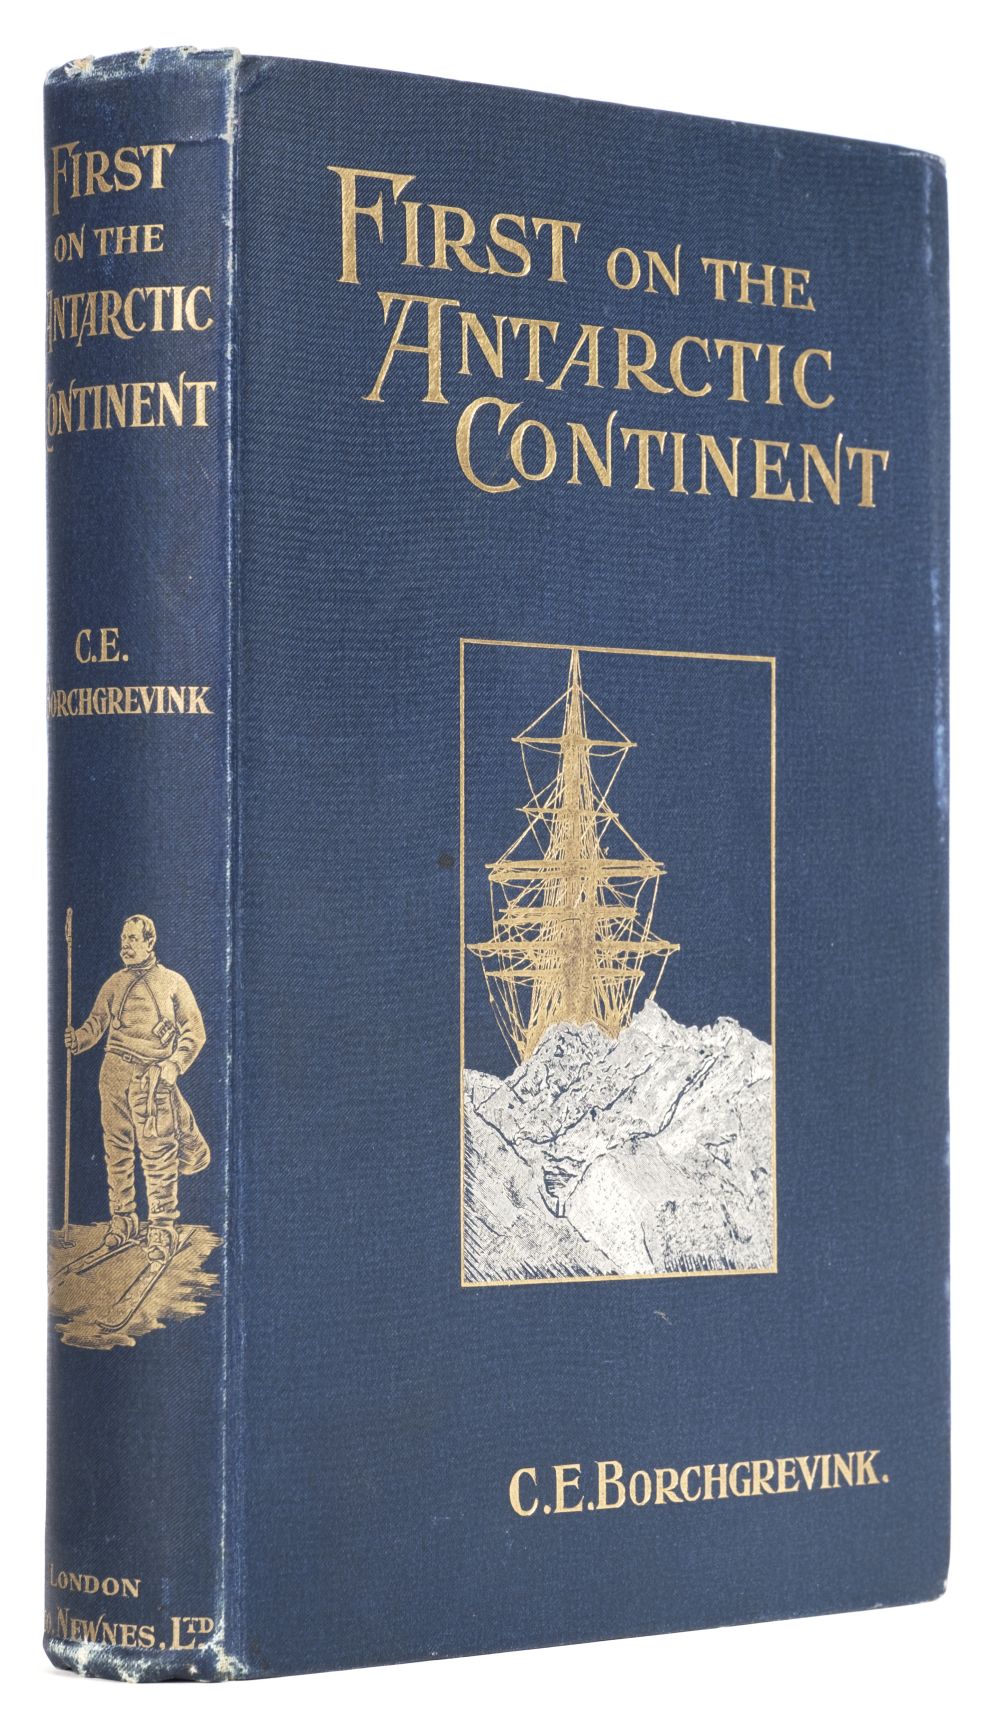 Borchgrevink (Carsten). First on the Antarctic Continent, 1st edition, London: George Newnes, 1901